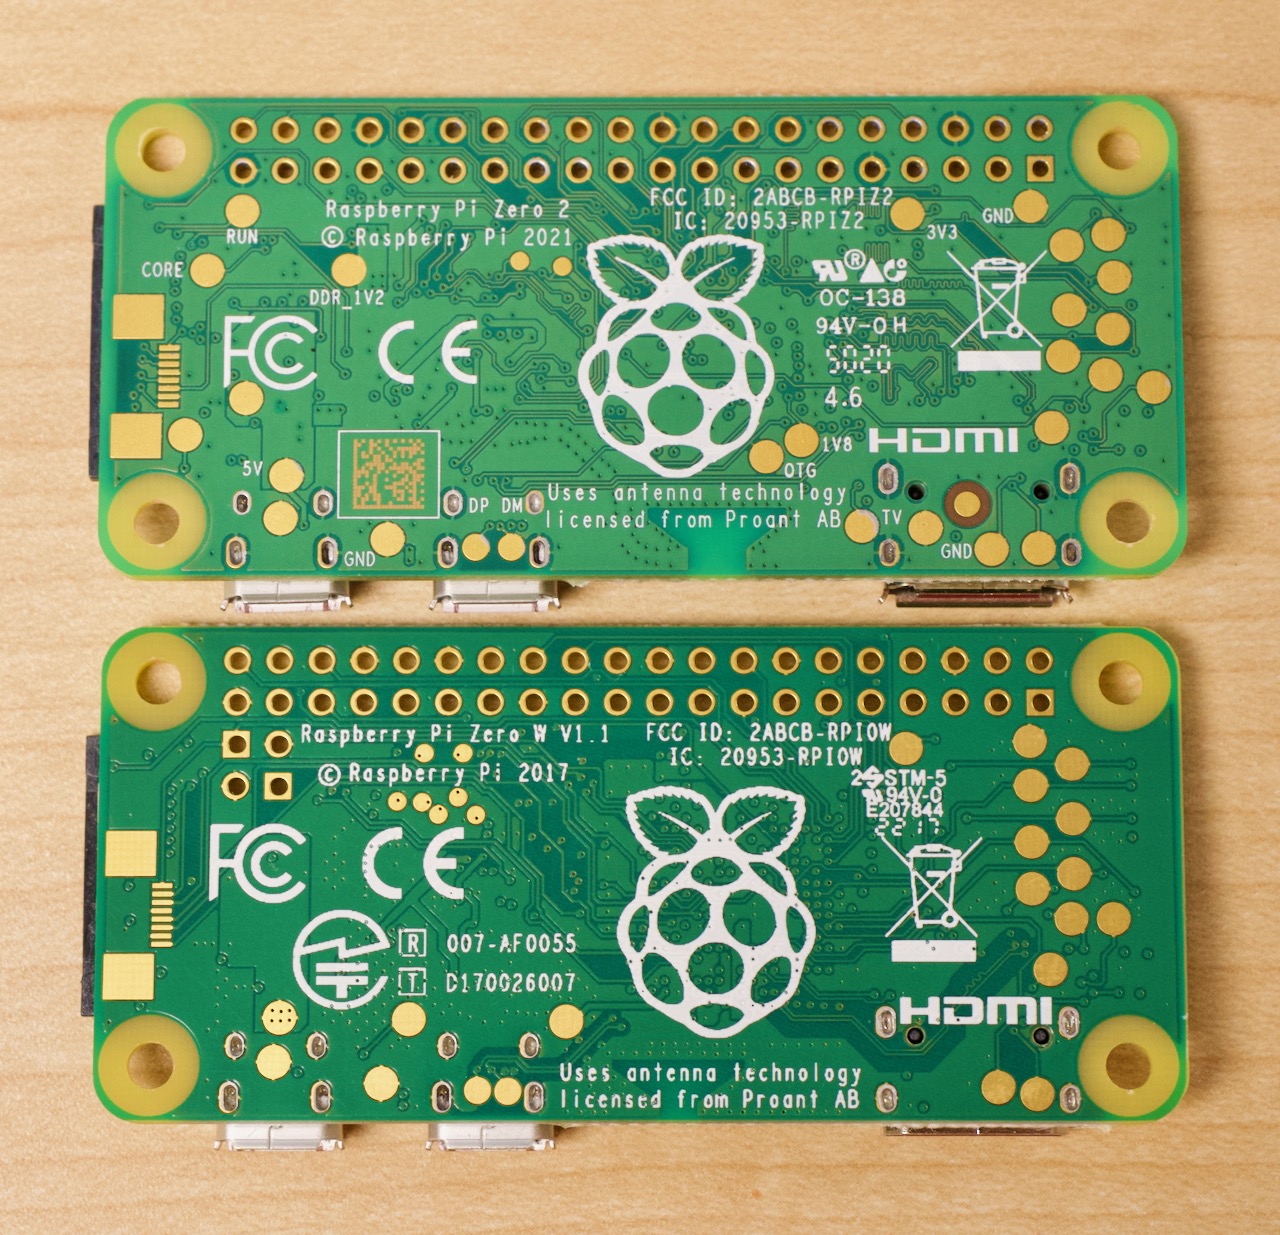 Pins and pads on bottom of Pi Zero 2 W in different locations than the pads on the Pi Zero W at bottom